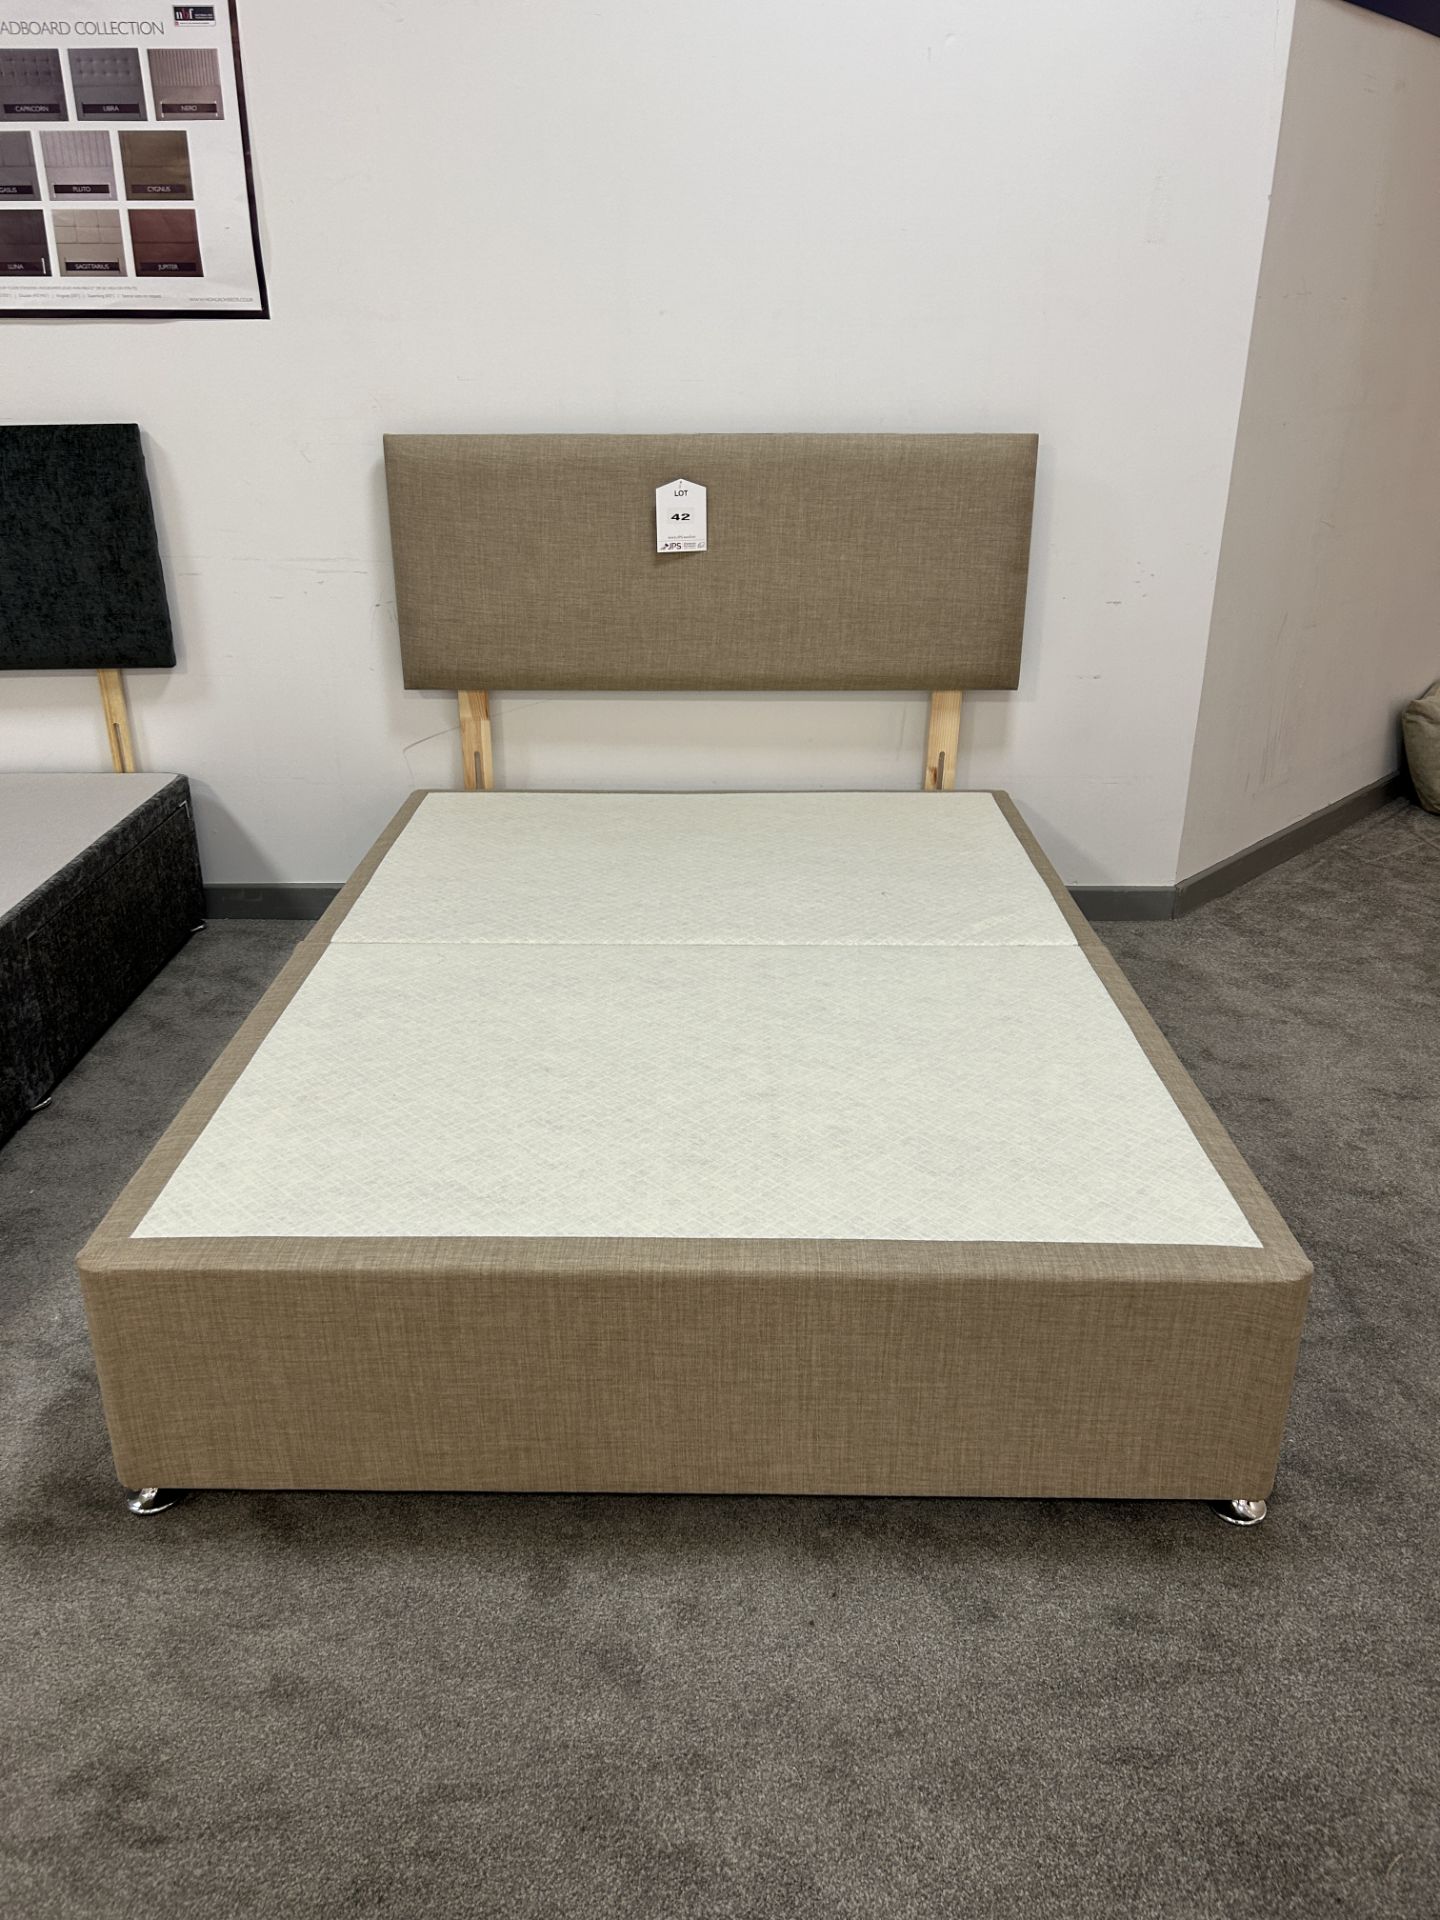 Ex-Display Double Size Bed Set incl: Base & Headboard in Beige